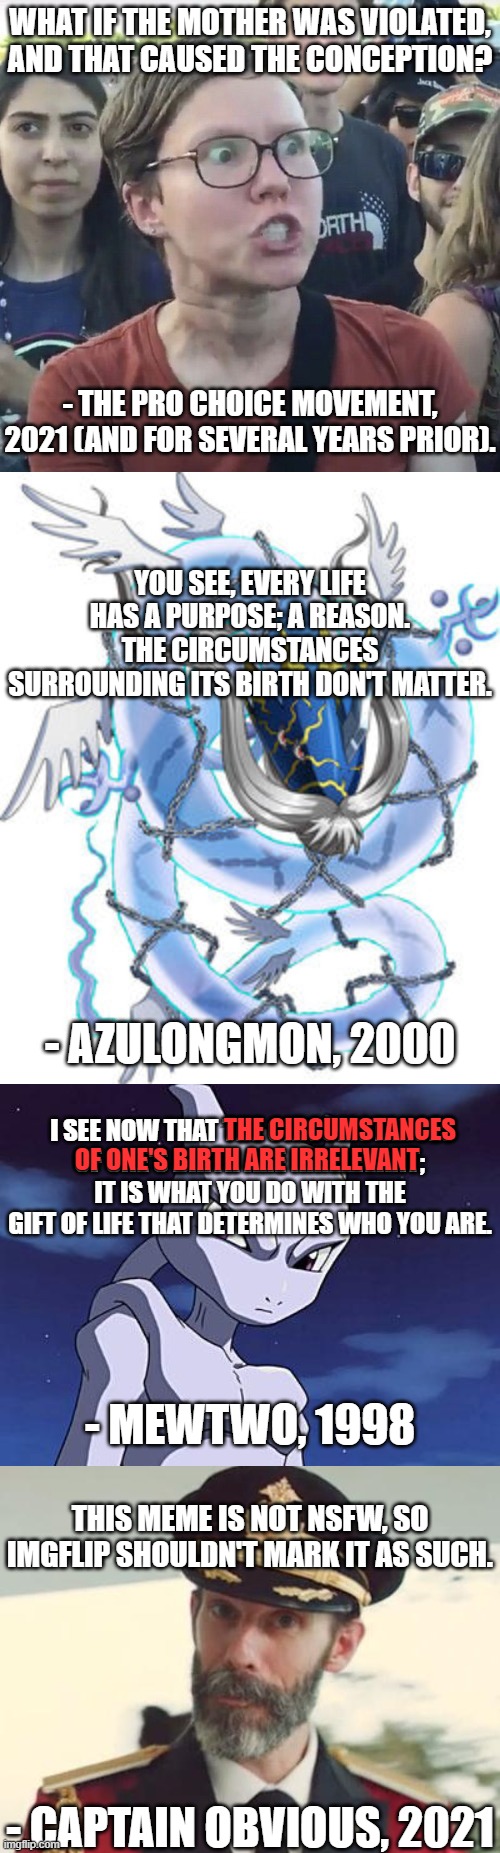 Imgflip, DO NOT Mark This As NSFW | WHAT IF THE MOTHER WAS VIOLATED, AND THAT CAUSED THE CONCEPTION? - THE PRO CHOICE MOVEMENT, 2021 (AND FOR SEVERAL YEARS PRIOR). YOU SEE, EVERY LIFE HAS A PURPOSE; A REASON. THE CIRCUMSTANCES SURROUNDING ITS BIRTH DON'T MATTER. - AZULONGMON, 2000; I SEE NOW THAT THE CIRCUMSTANCES OF ONE'S BIRTH ARE IRRELEVANT; IT IS WHAT YOU DO WITH THE GIFT OF LIFE THAT DETERMINES WHO YOU ARE. THE CIRCUMSTANCES; OF ONE'S BIRTH ARE IRRELEVANT; - MEWTWO, 1998; THIS MEME IS NOT NSFW, SO IMGFLIP SHOULDN'T MARK IT AS SUCH. - CAPTAIN OBVIOUS, 2021 | image tagged in triggered feminist,azulongmon,mewtwo,captain obvious,your argument is invalid,imgflip | made w/ Imgflip meme maker